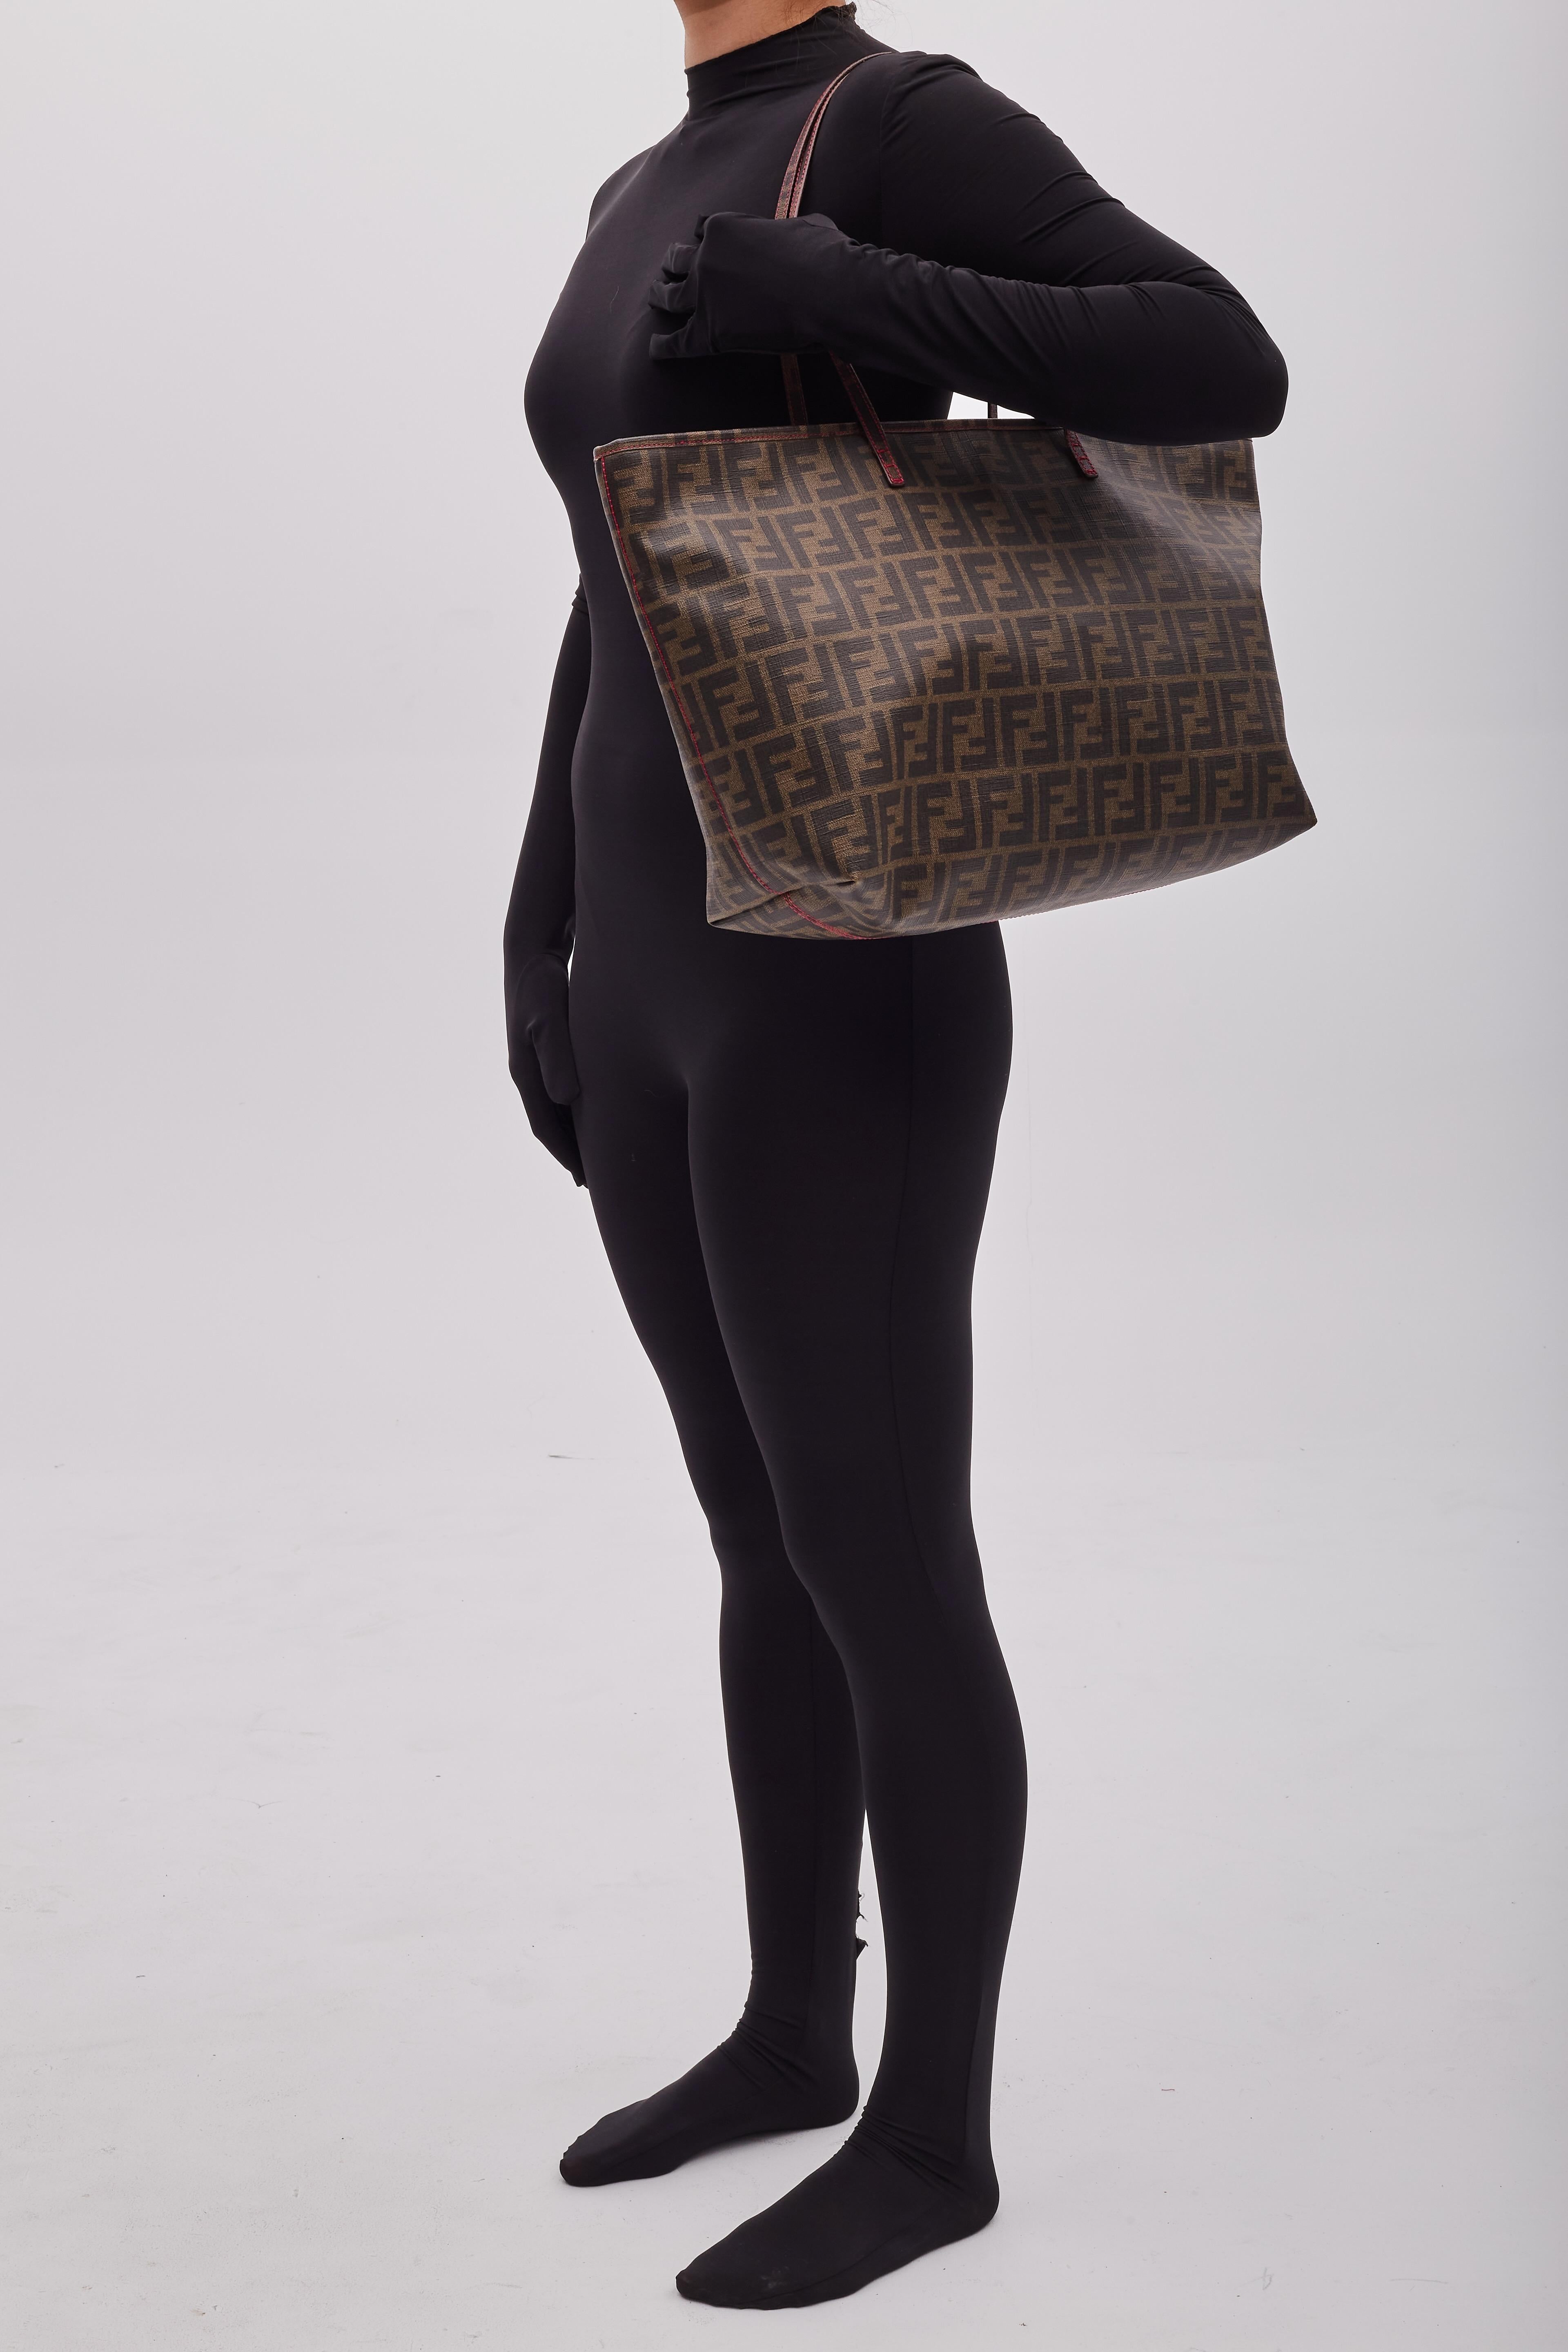 Fendi tote bag from the 2011 collection. This bag is made of coated canvas in brown/ebony with monogram Zucca print throughout. The bag features gold-tone hardware, dual flat leather shoulder straps, an open top and fuchsia stitching details. The